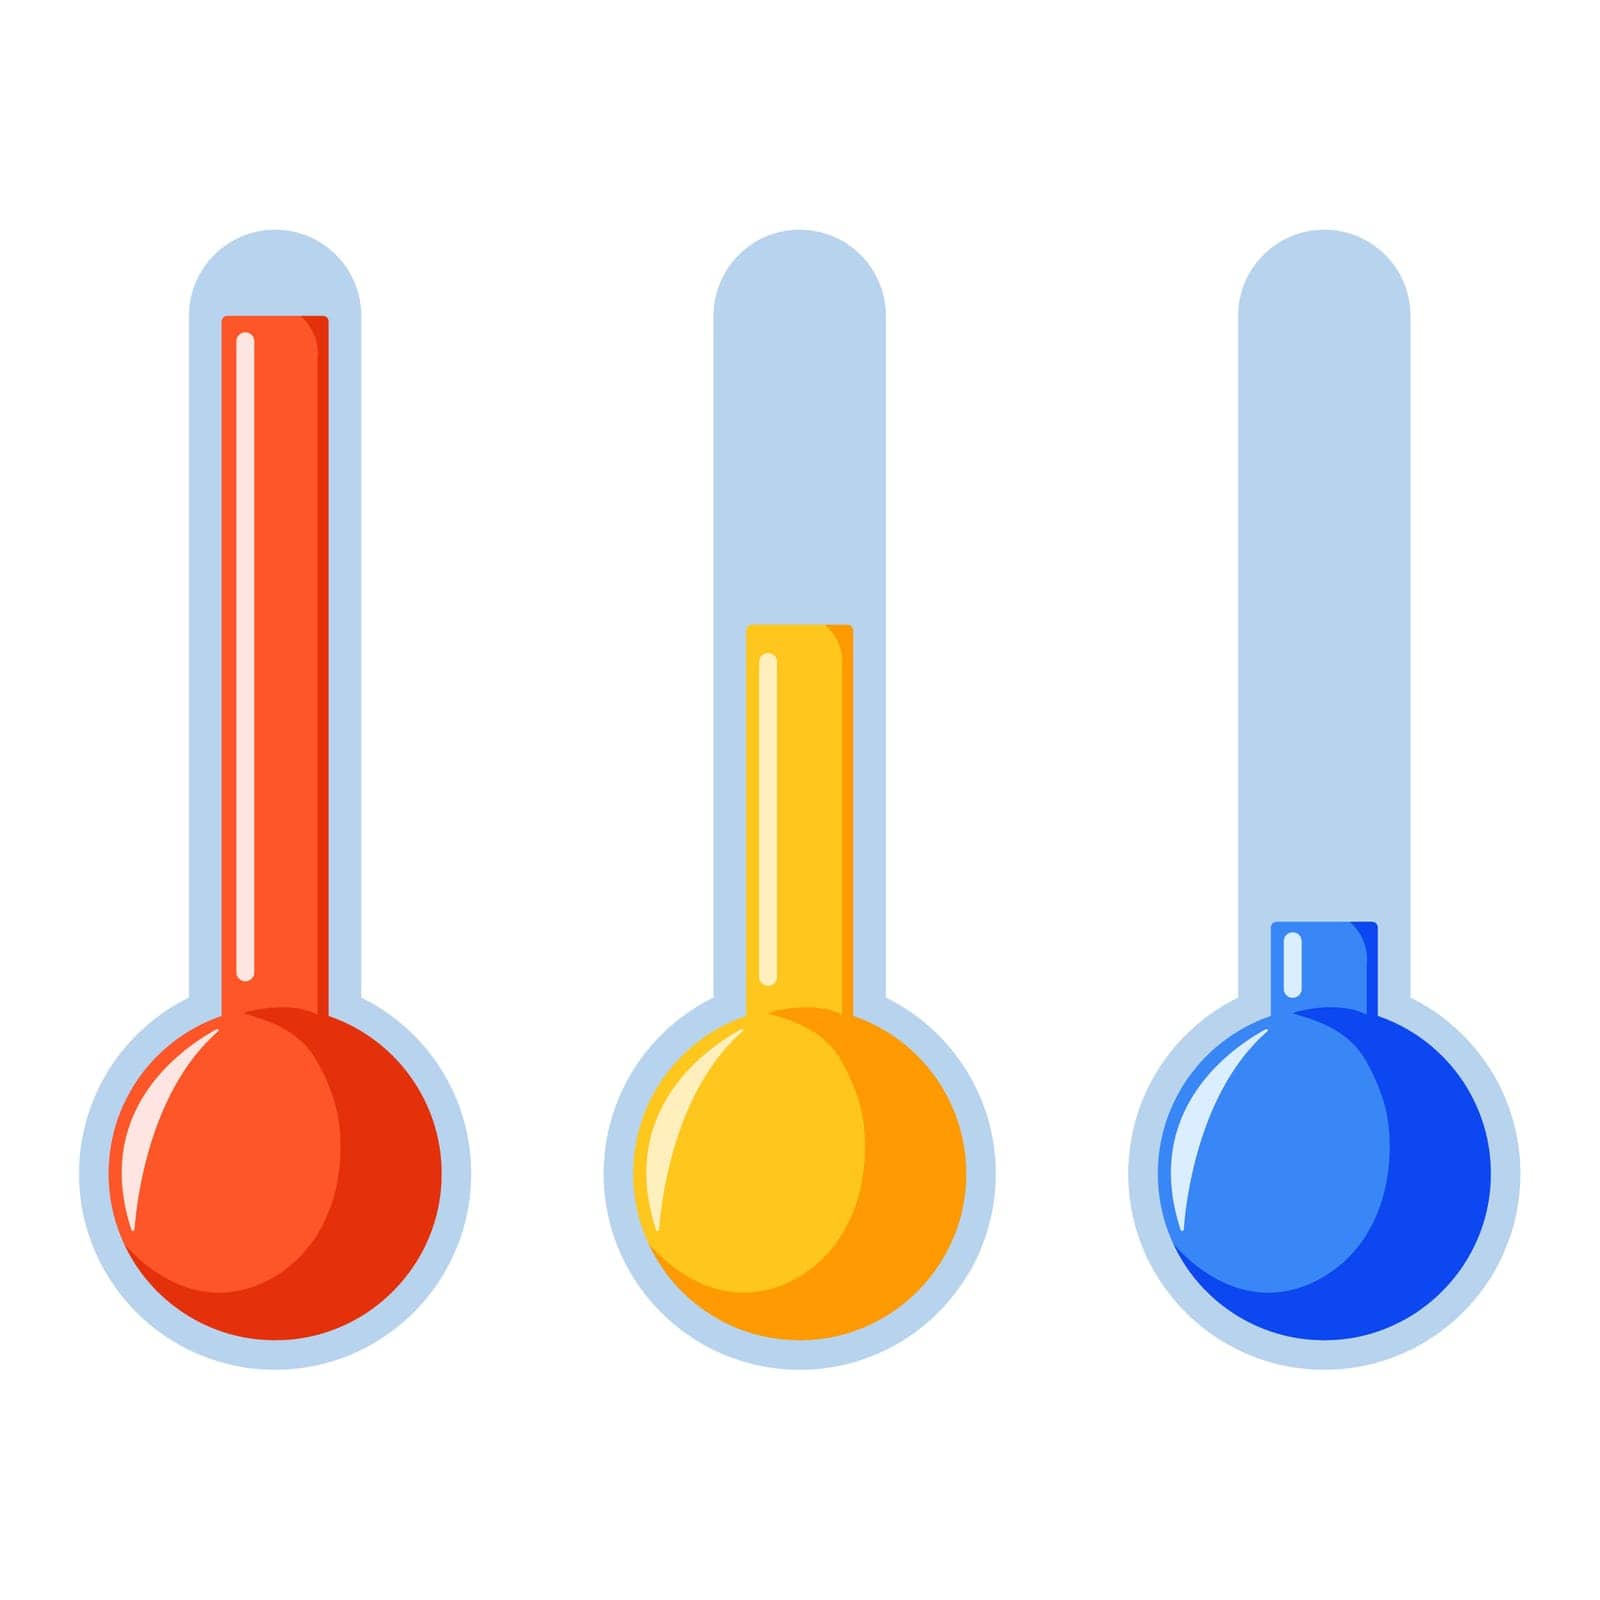 Thermometers icons in cartoon style. Measure hot and cold temperature, forecast, climate and meteorology. Vector illustration isolated on white background.